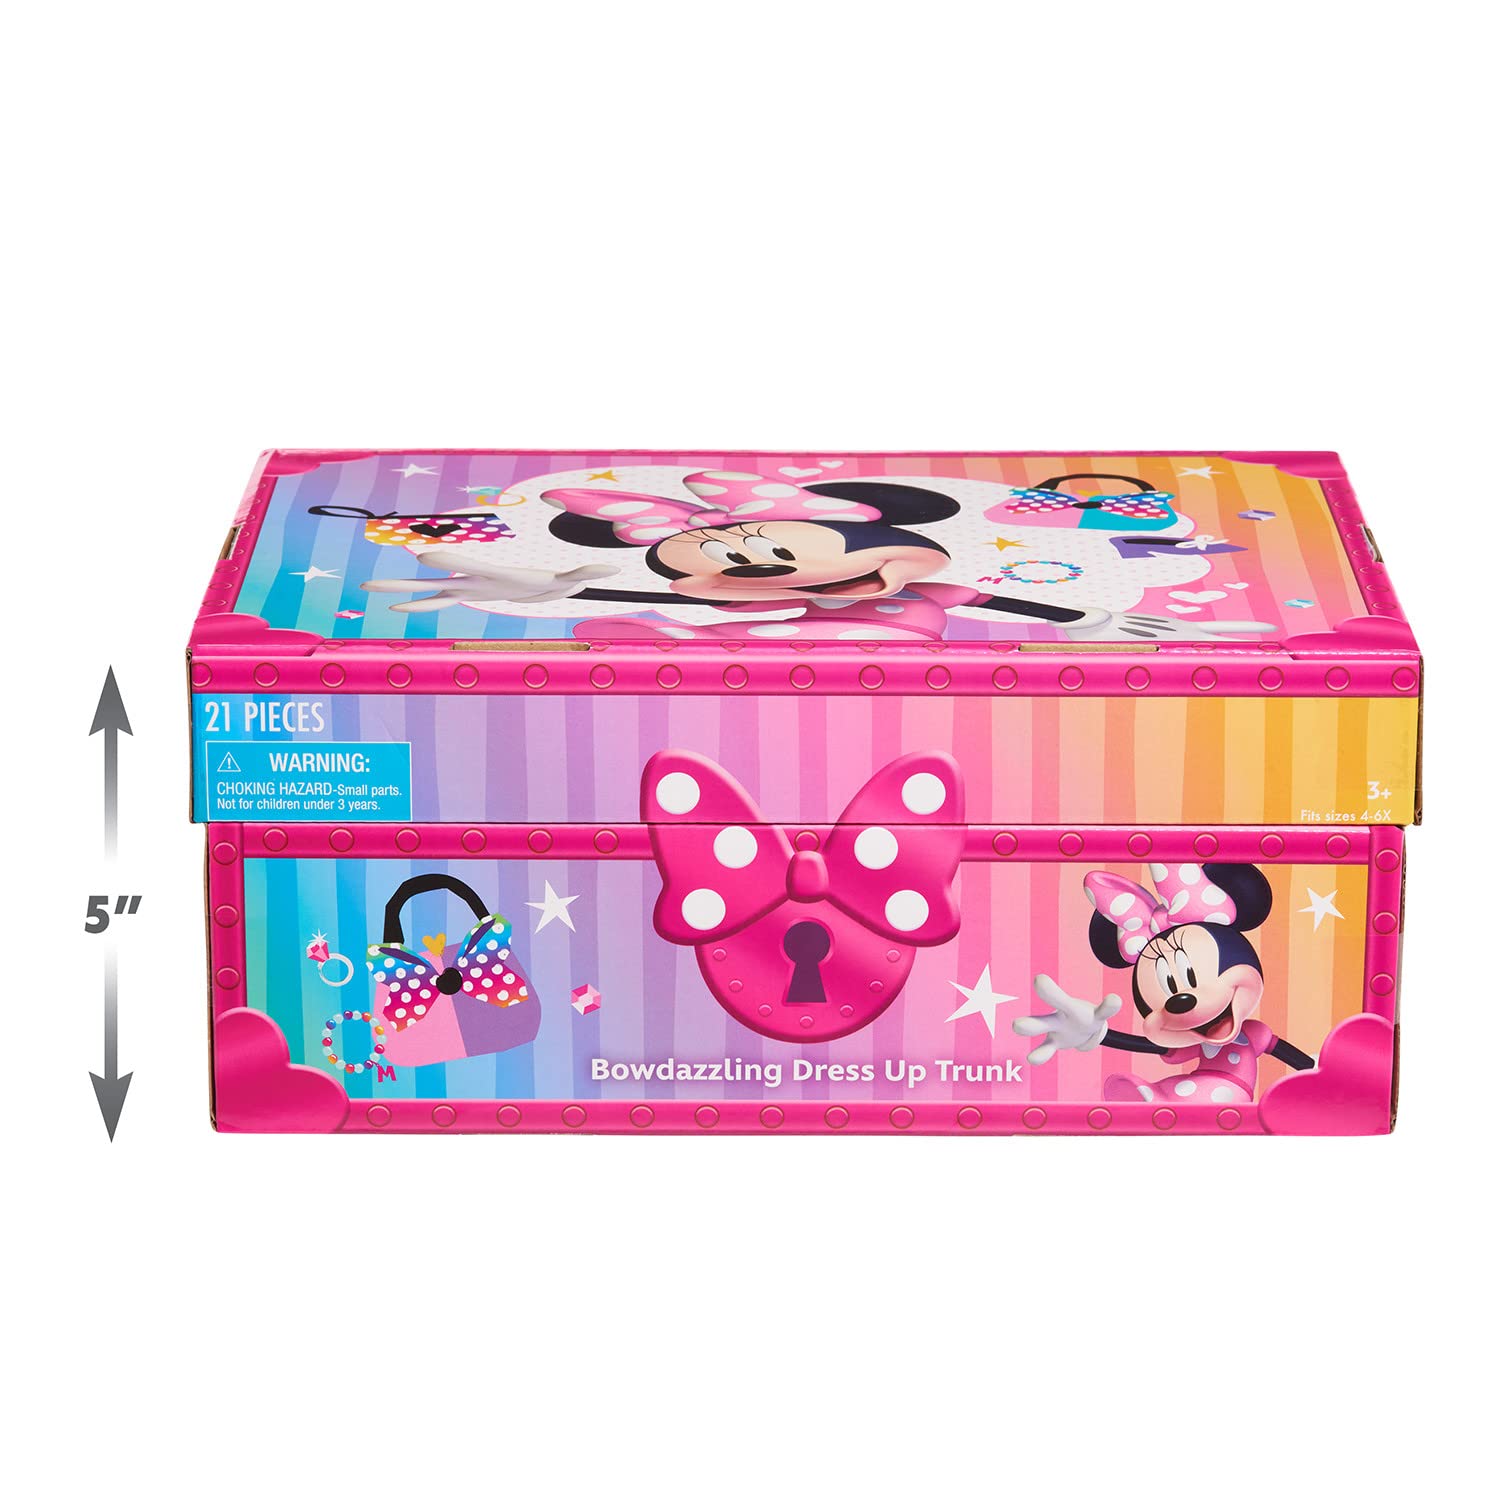 Disney Junior Minnie Mouse Bowdazzling Dress-Up and Pretend Play Trunk, Fits Sizes 4-6X, Kids Toys for Ages 3 Up, Amazon Exclusive